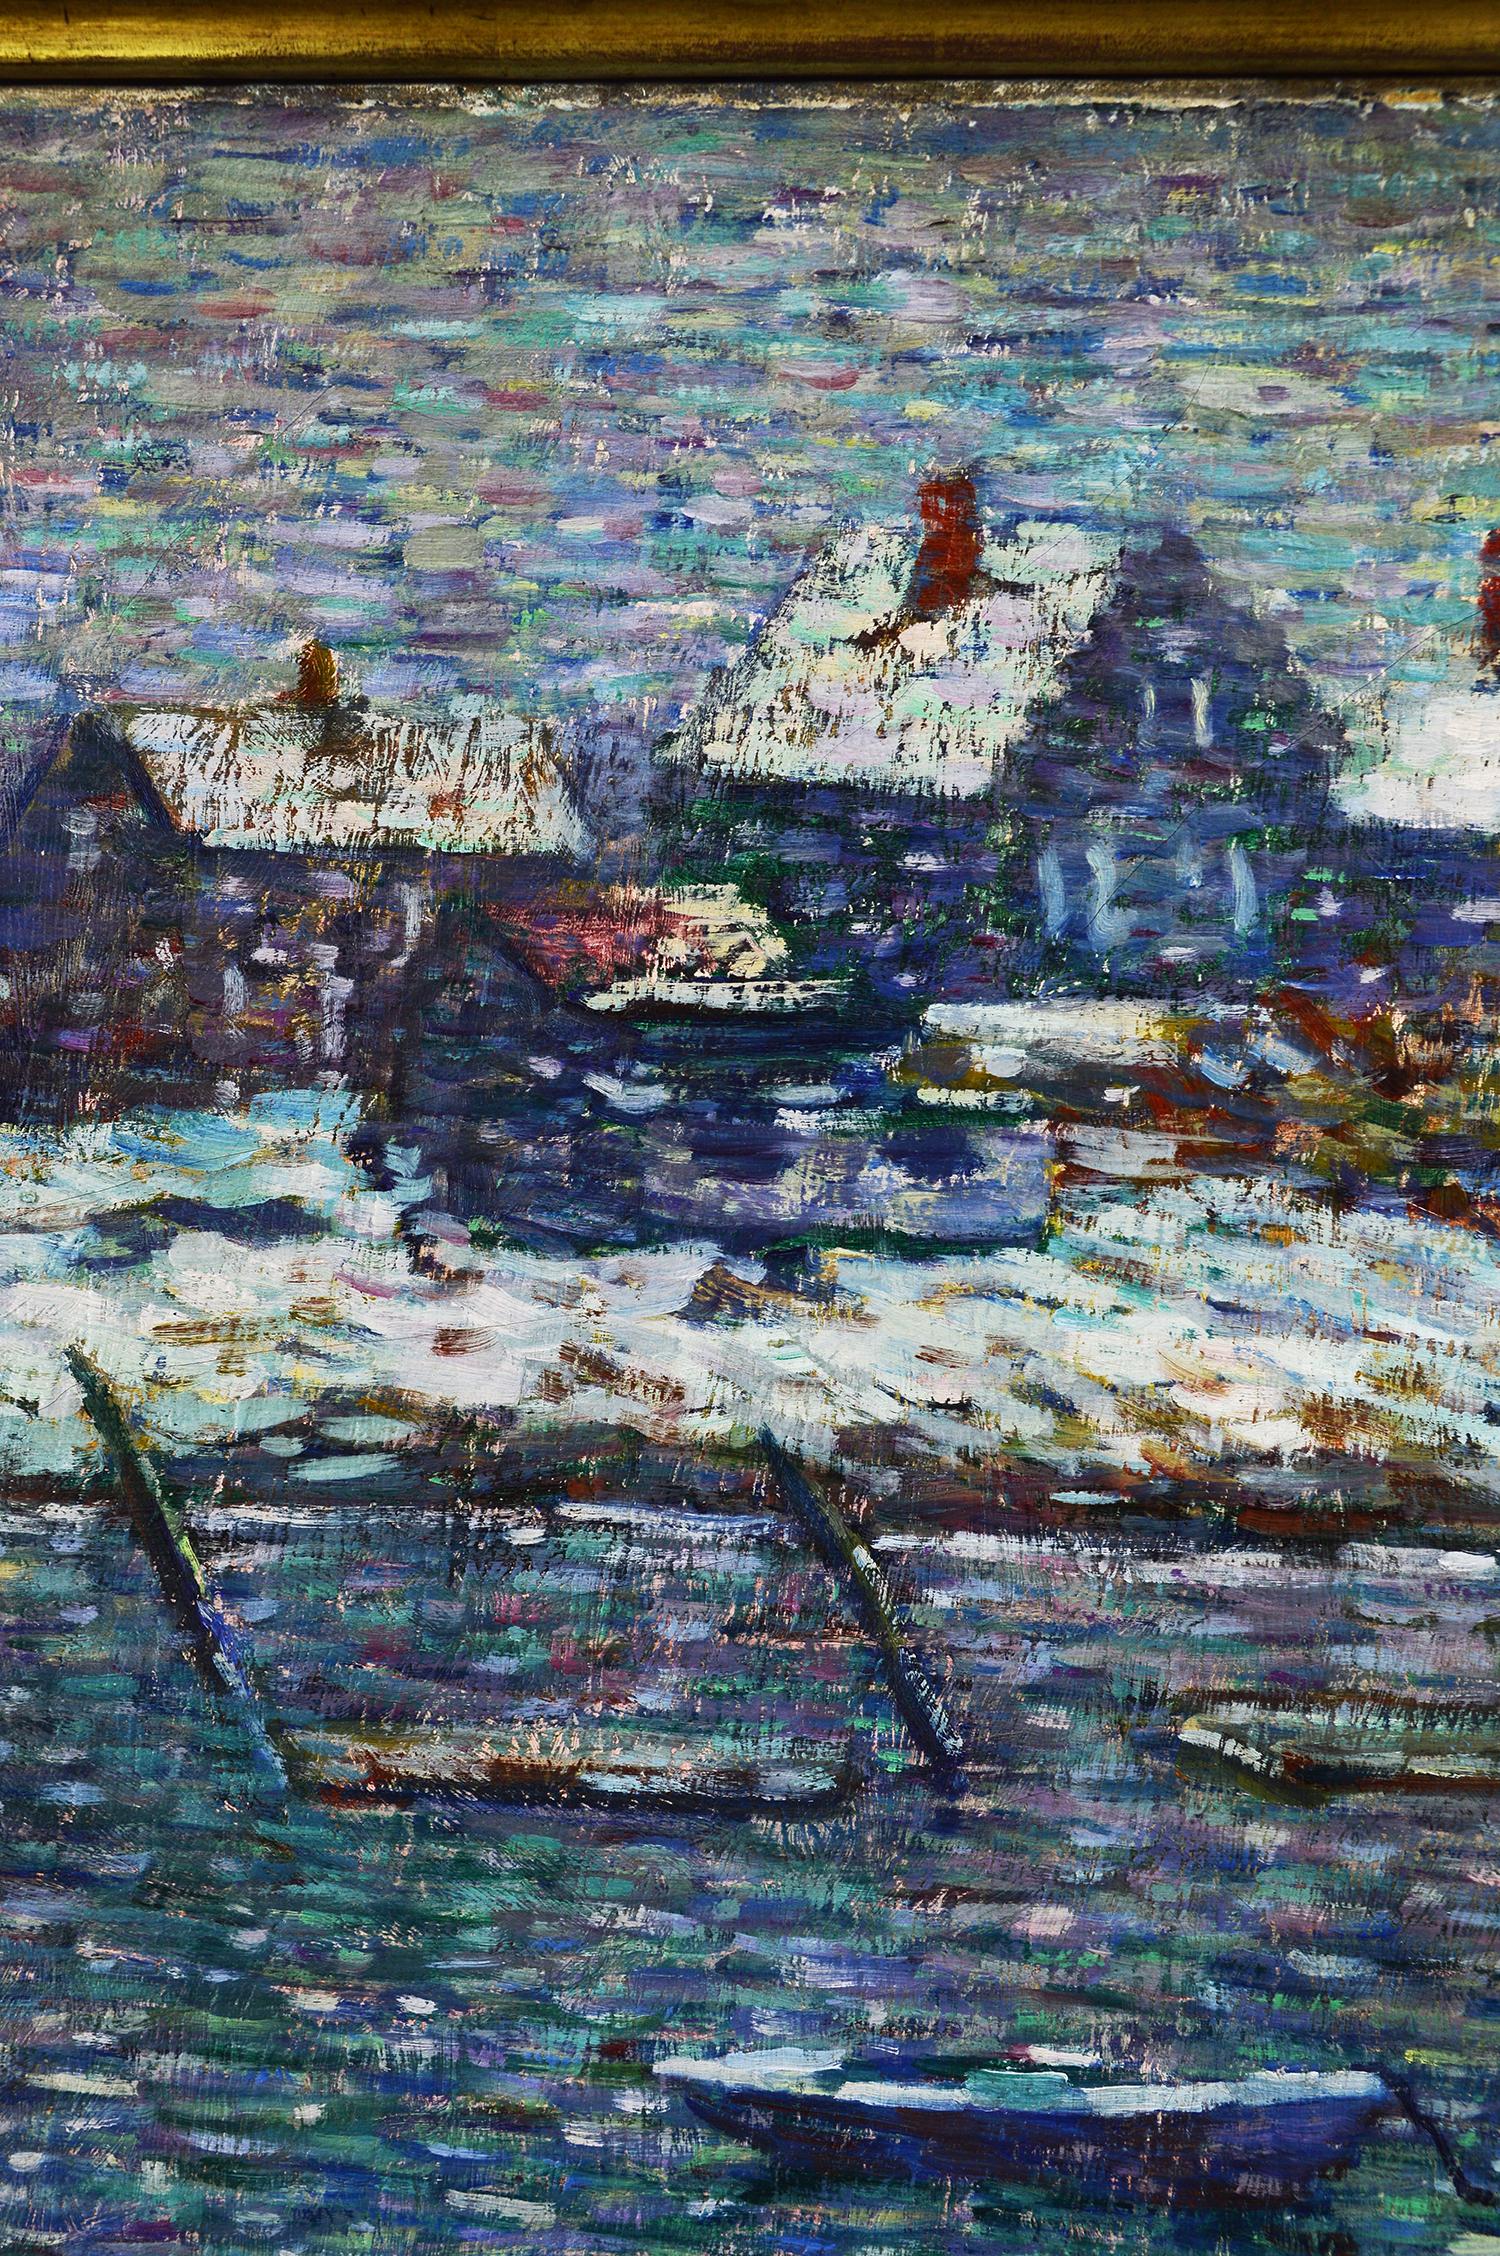 Boats in Winter - Abstract Impressionist Painting by Charles Salis Kaelin